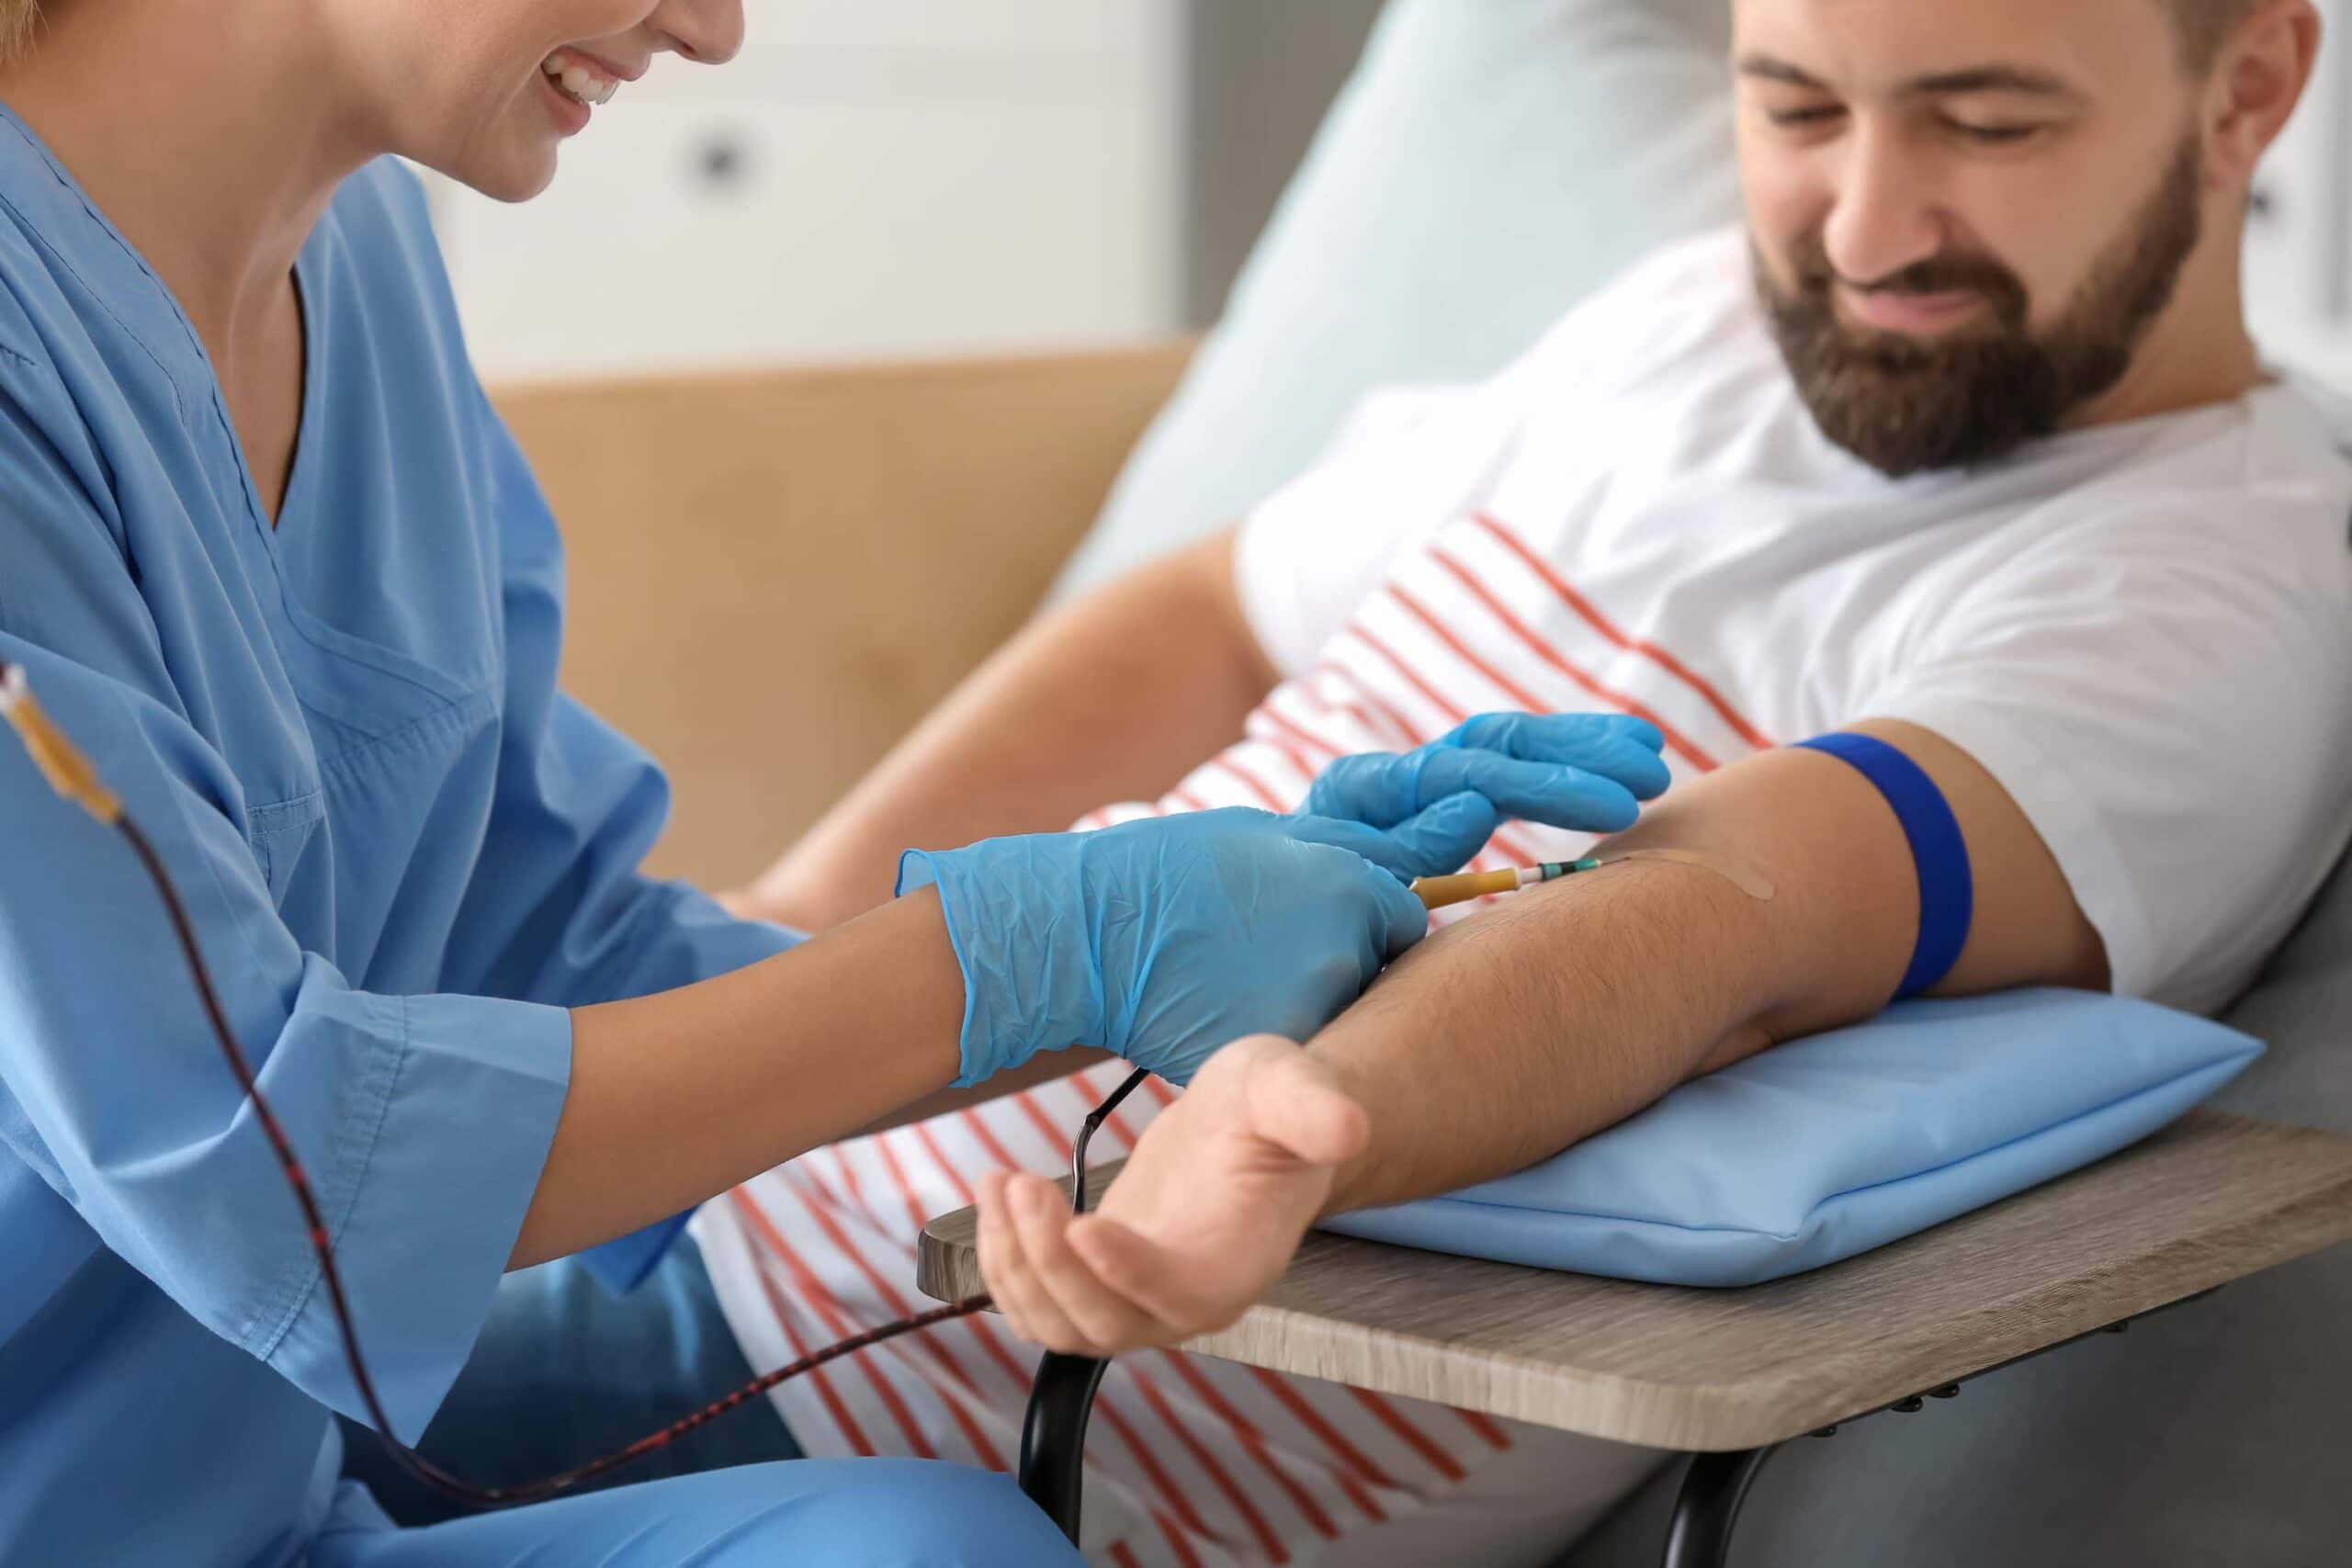 How To Make Giving Blood A Breeze – Even If You Have A Needle-Phobia